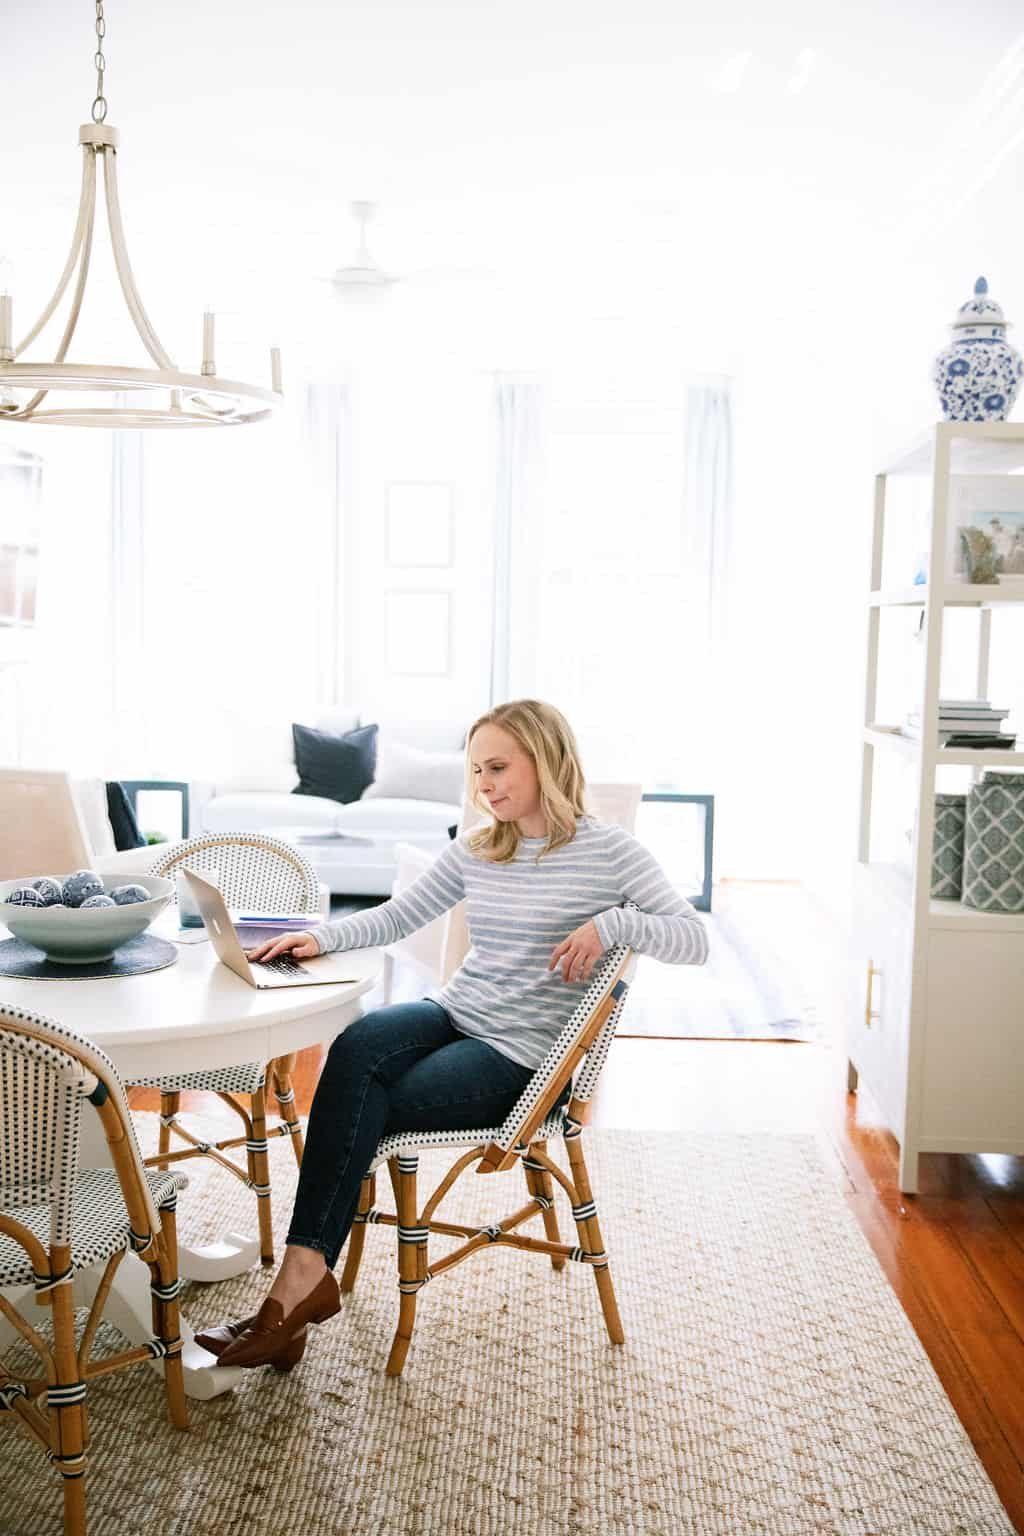 Digital Grace Design owner, Sarah, sits at white round table working on laptop in blue and white striped sweater